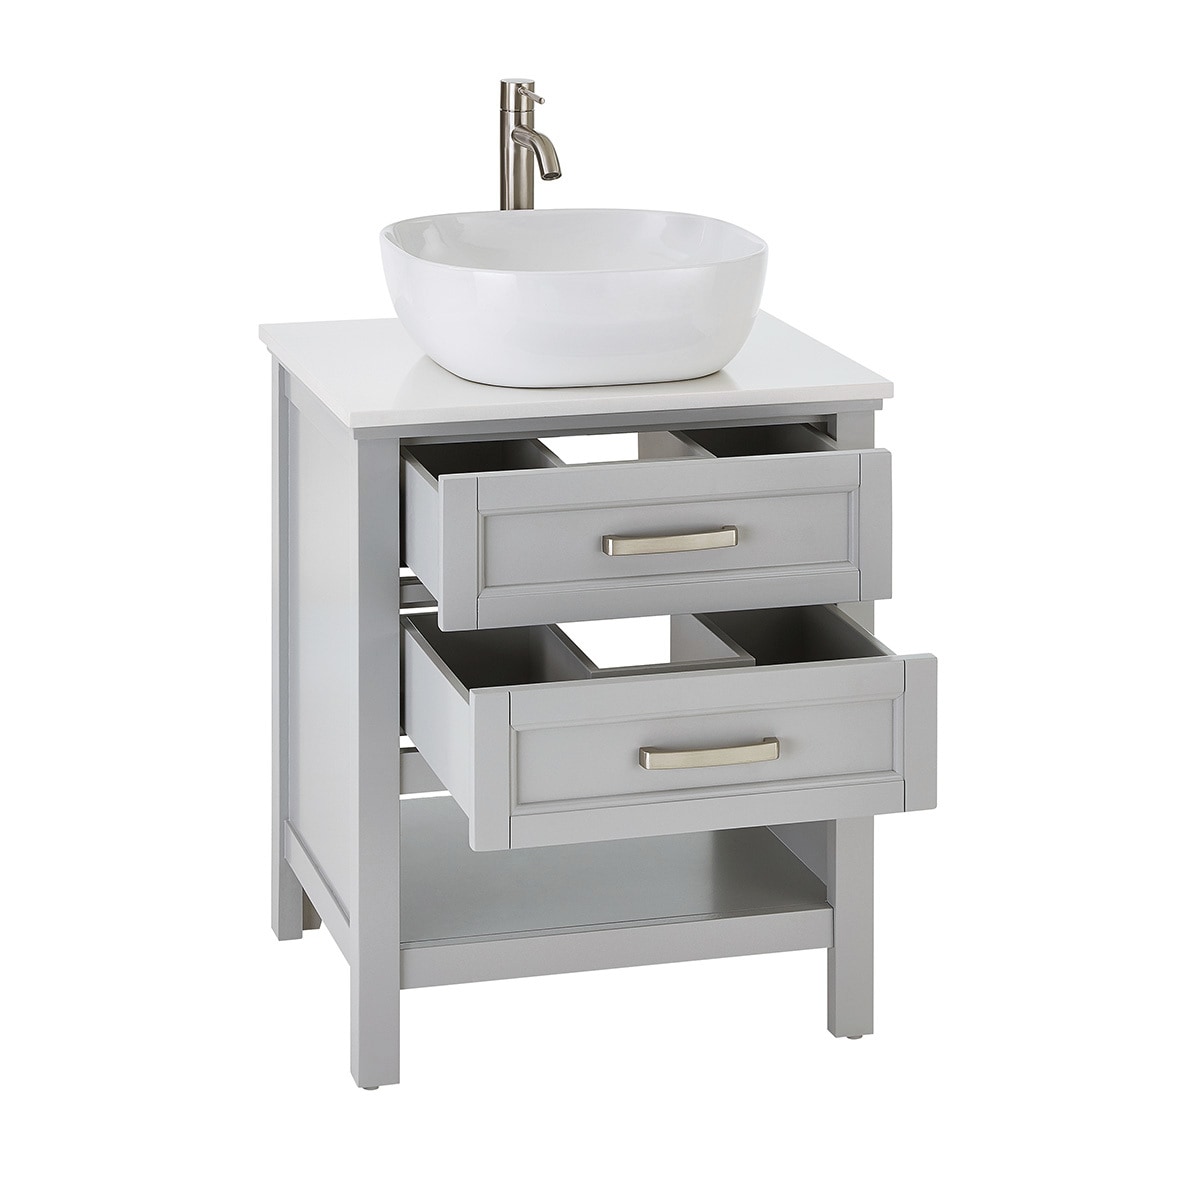 Teuer Weiss Vessel Type Lavatory - One-Stop Shop Home Improvement